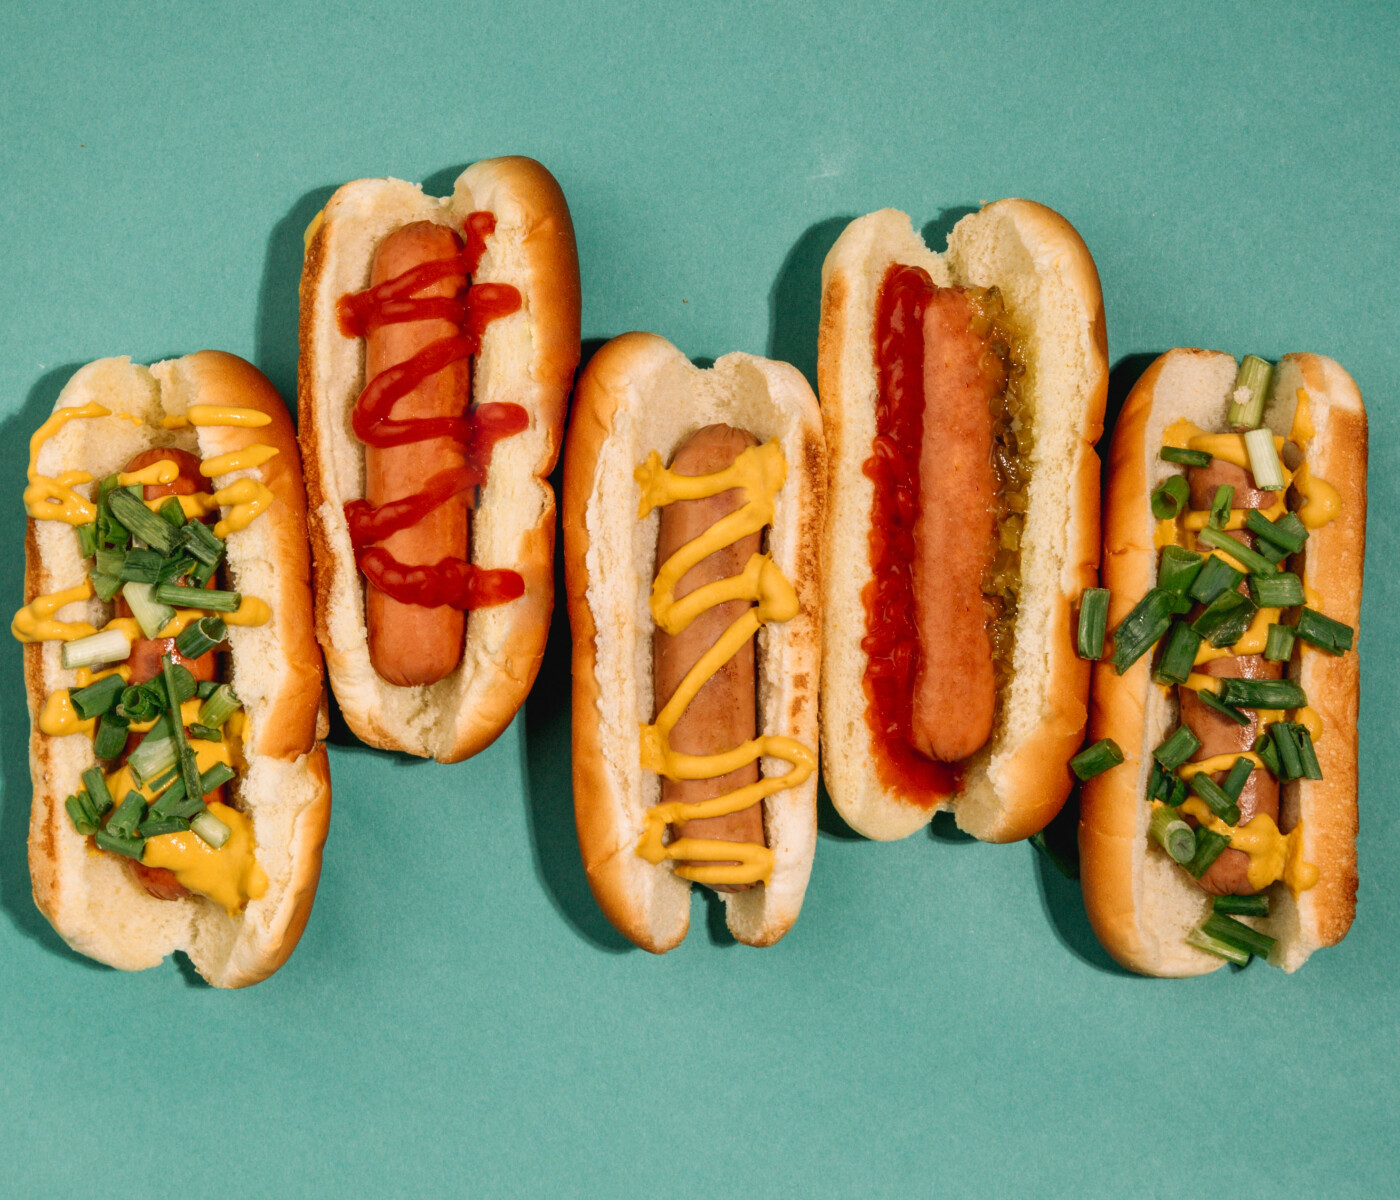 Different variations of hotdogs